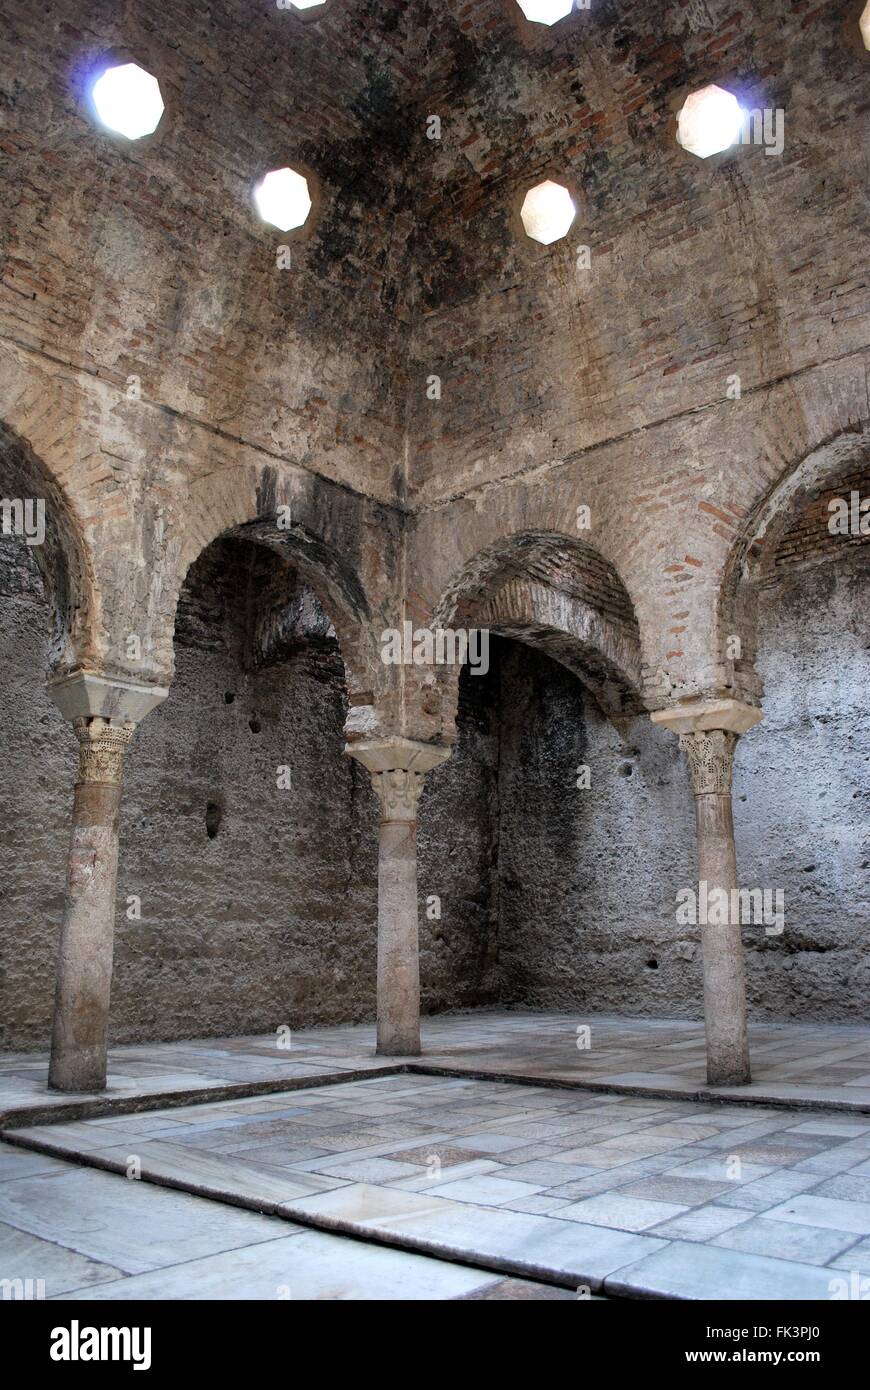 One Of The Rooms Inside The Arab Baths With Star Shaped Air